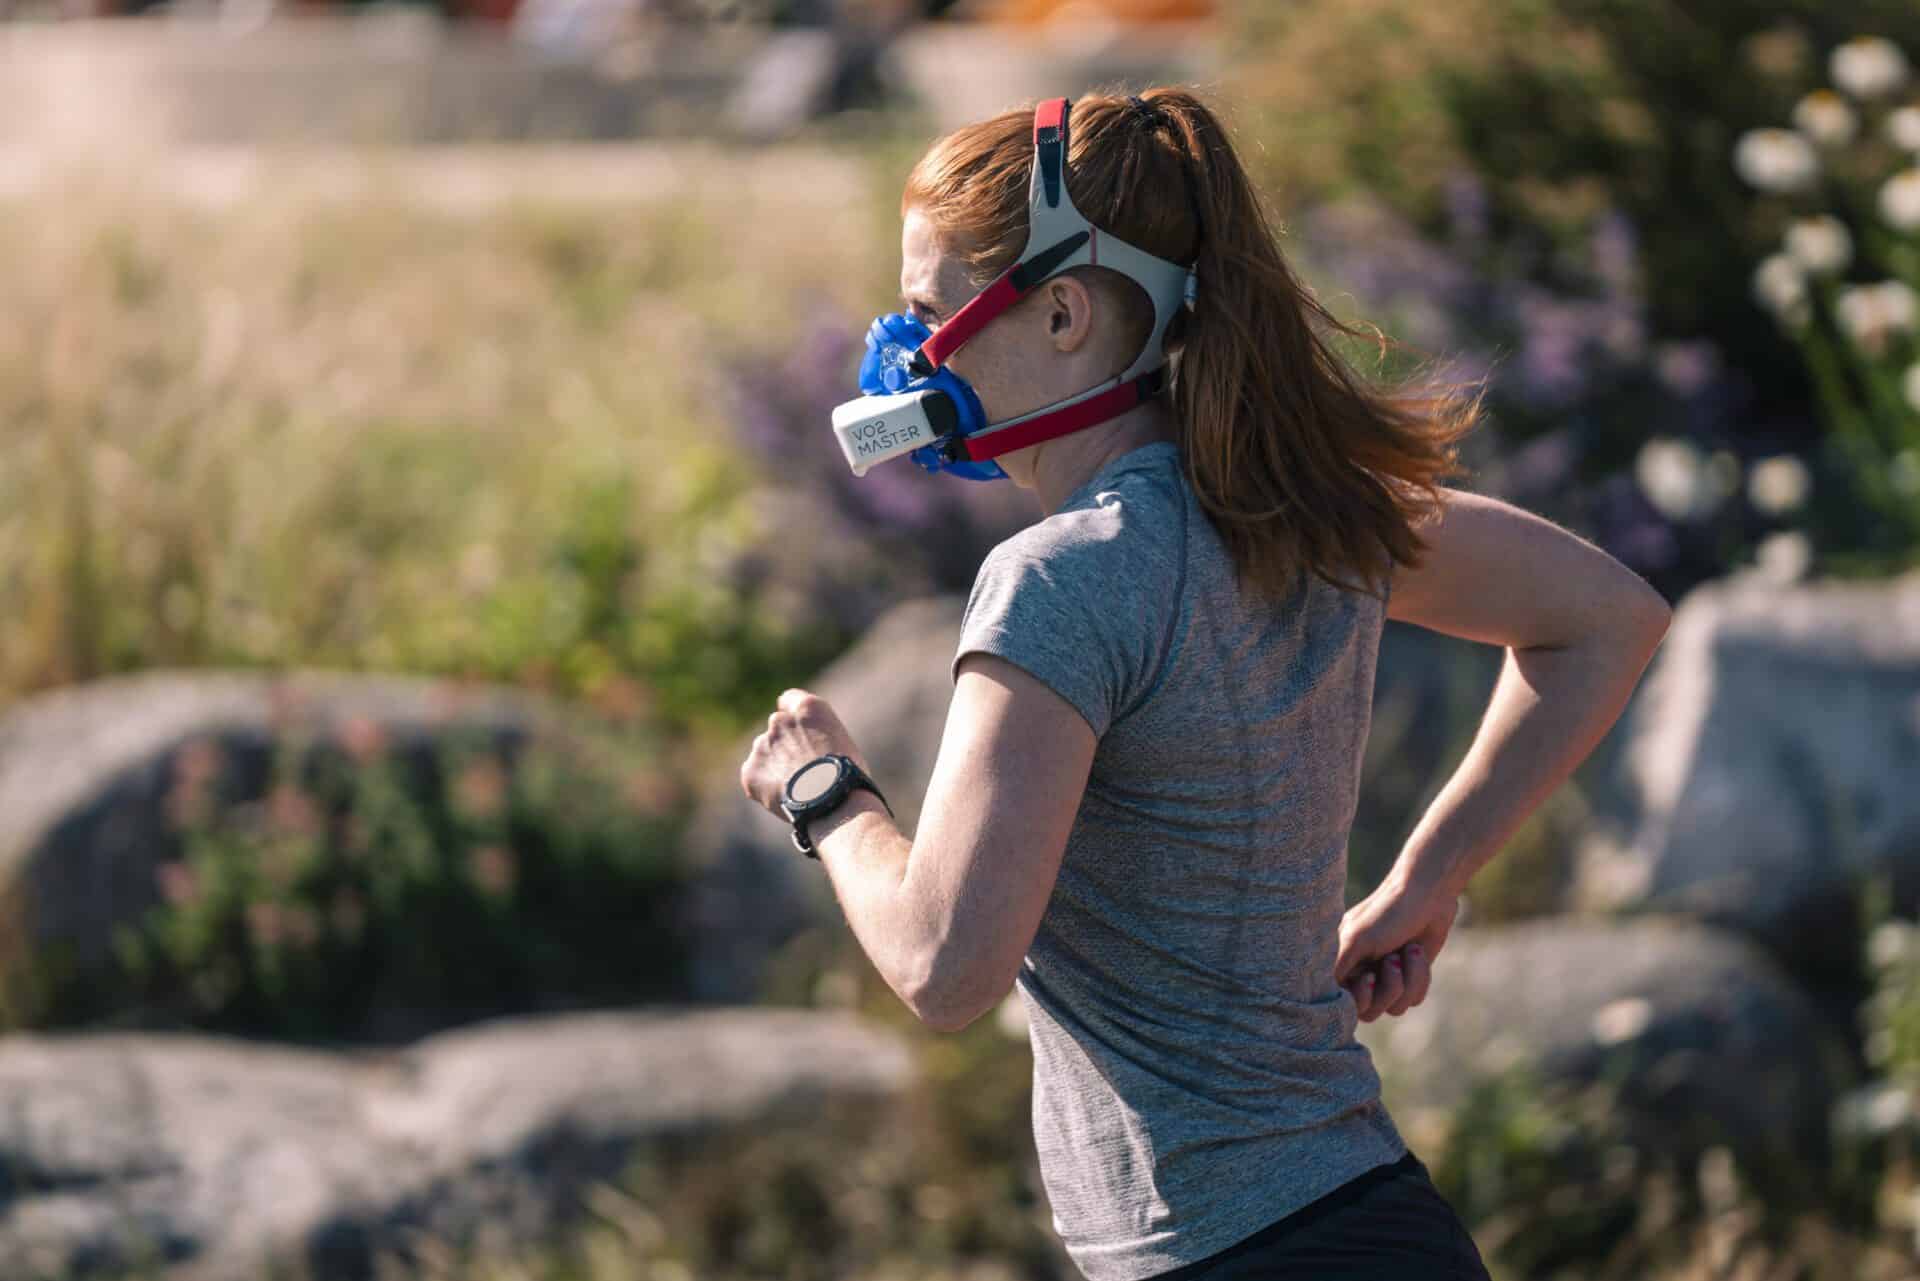 Woman running outdoors, measuring VT zones with the VO2 Master analyzer and mask